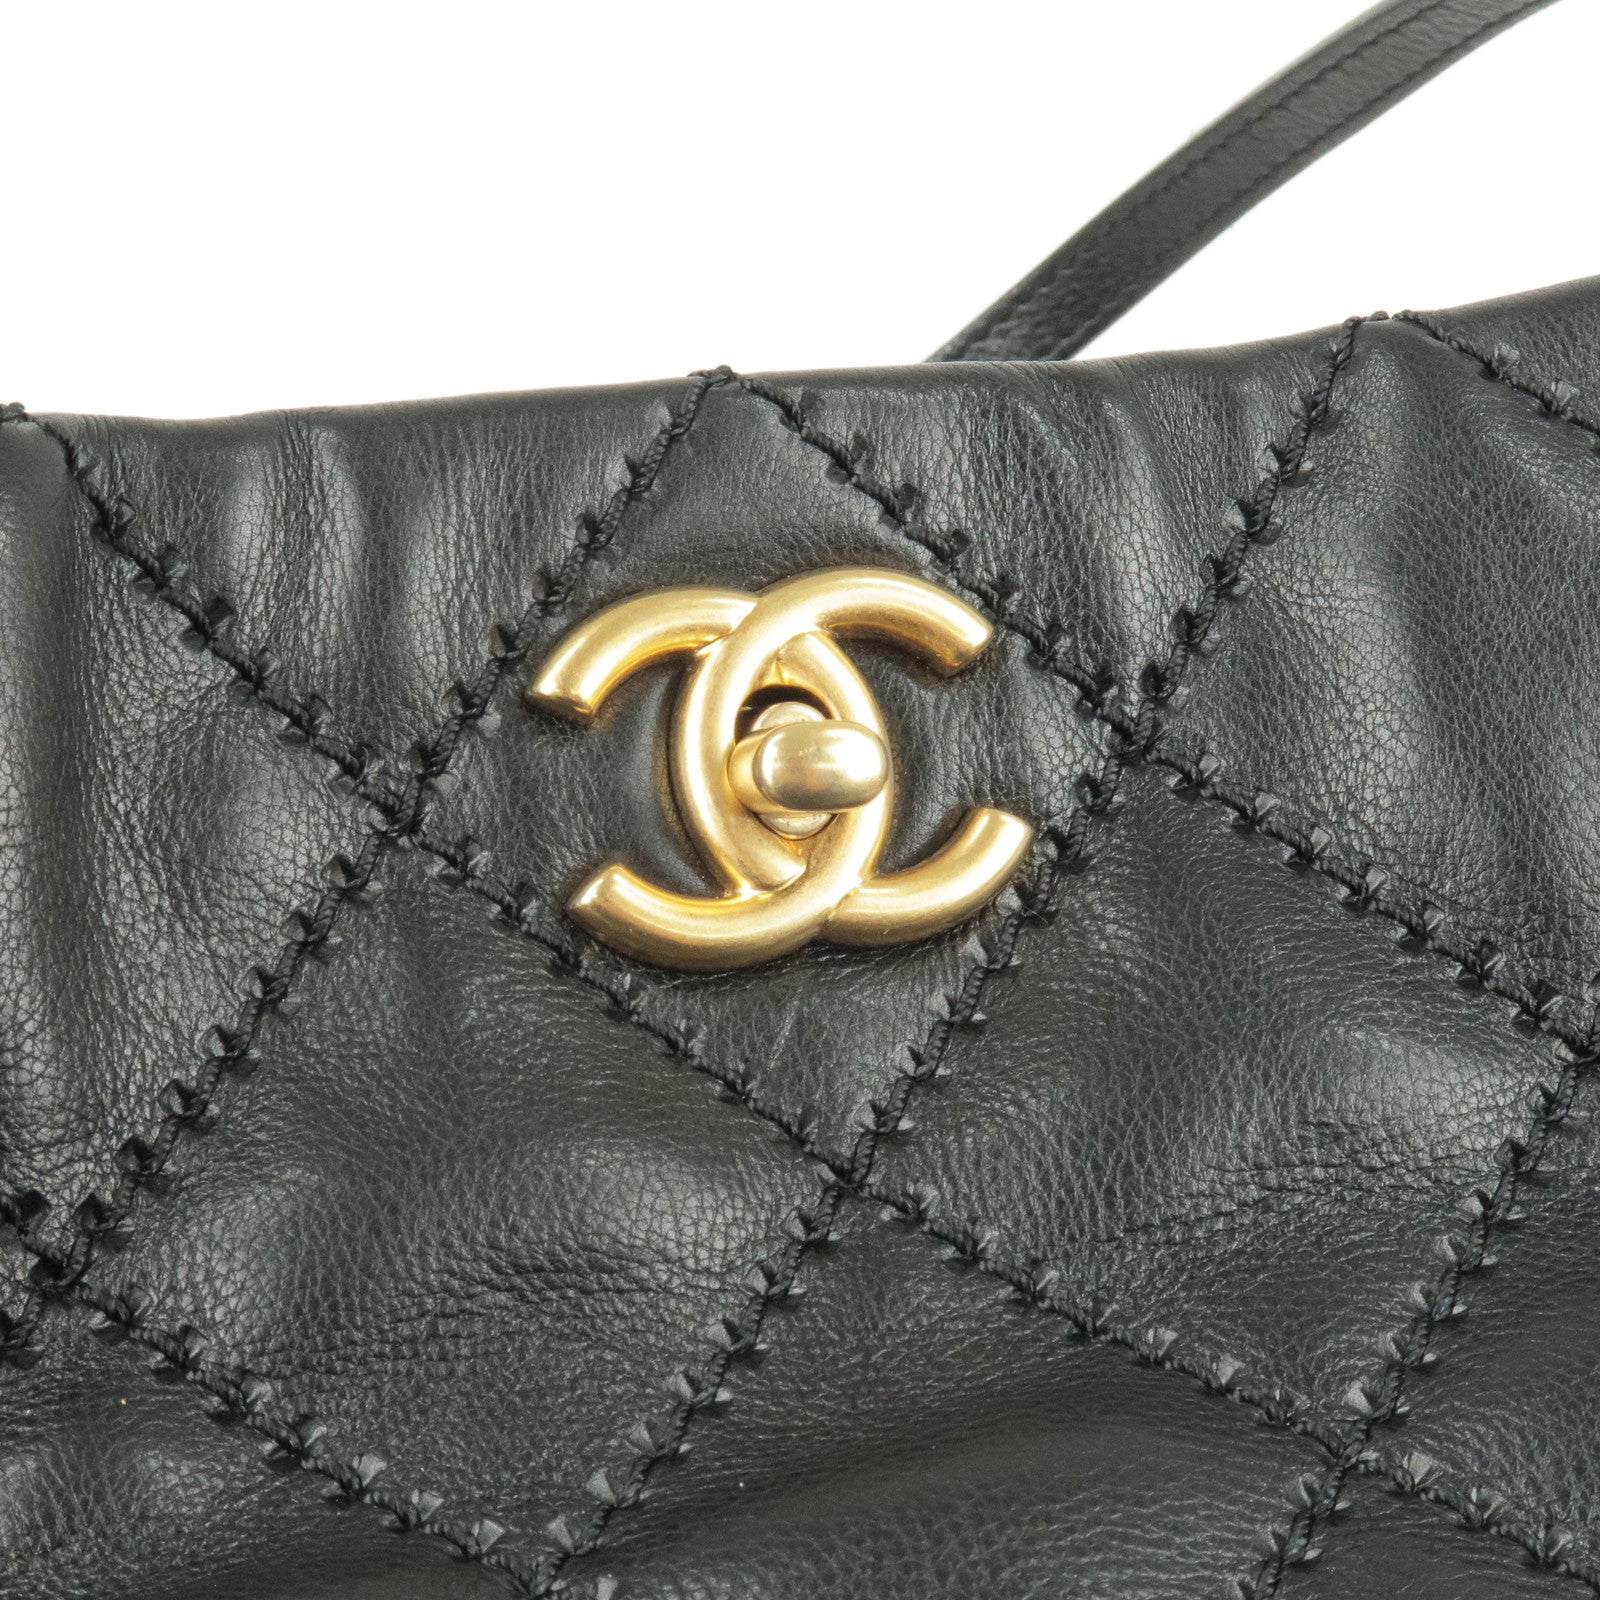 CHANEL Pre-Owned 2008-2009 Classic Flap Shoulder Bag - Farfetch